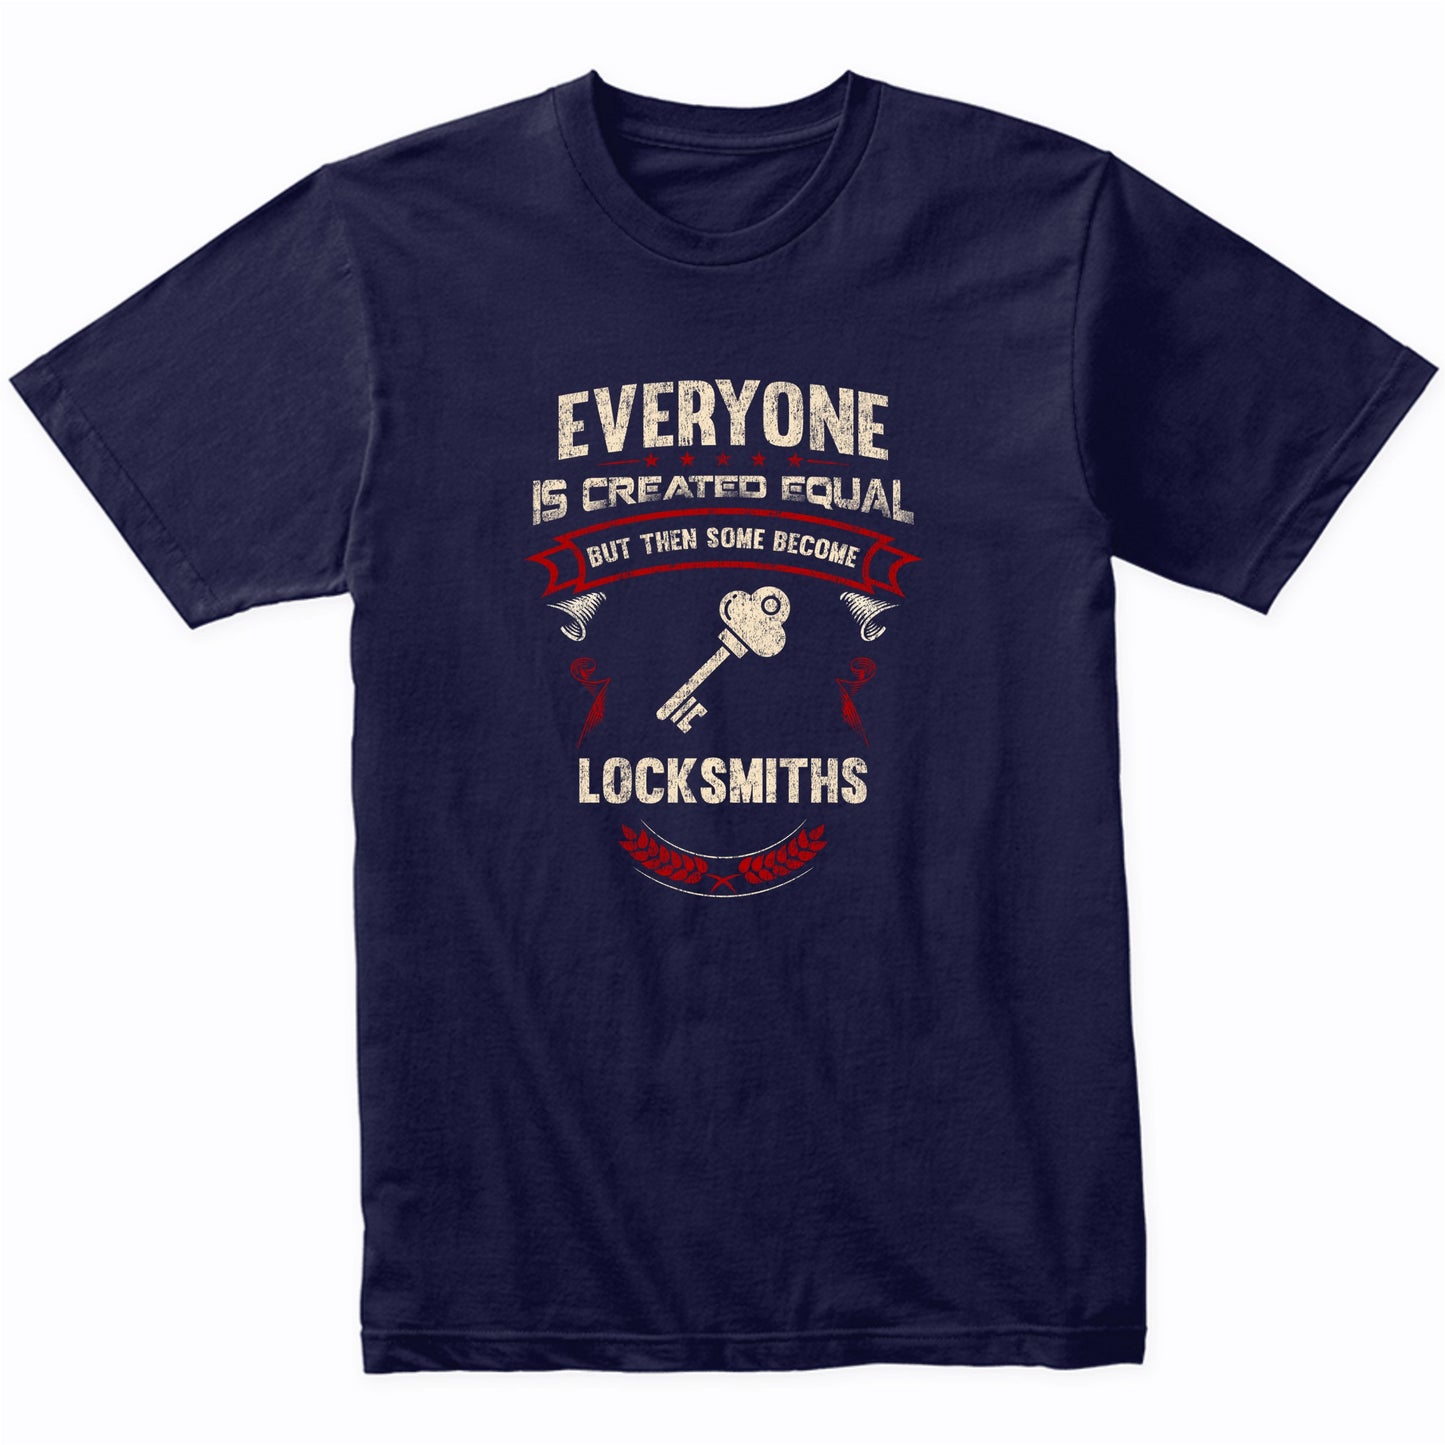 Everyone is Created Equal But Then Some Become Locksmiths Funny T-Shirt